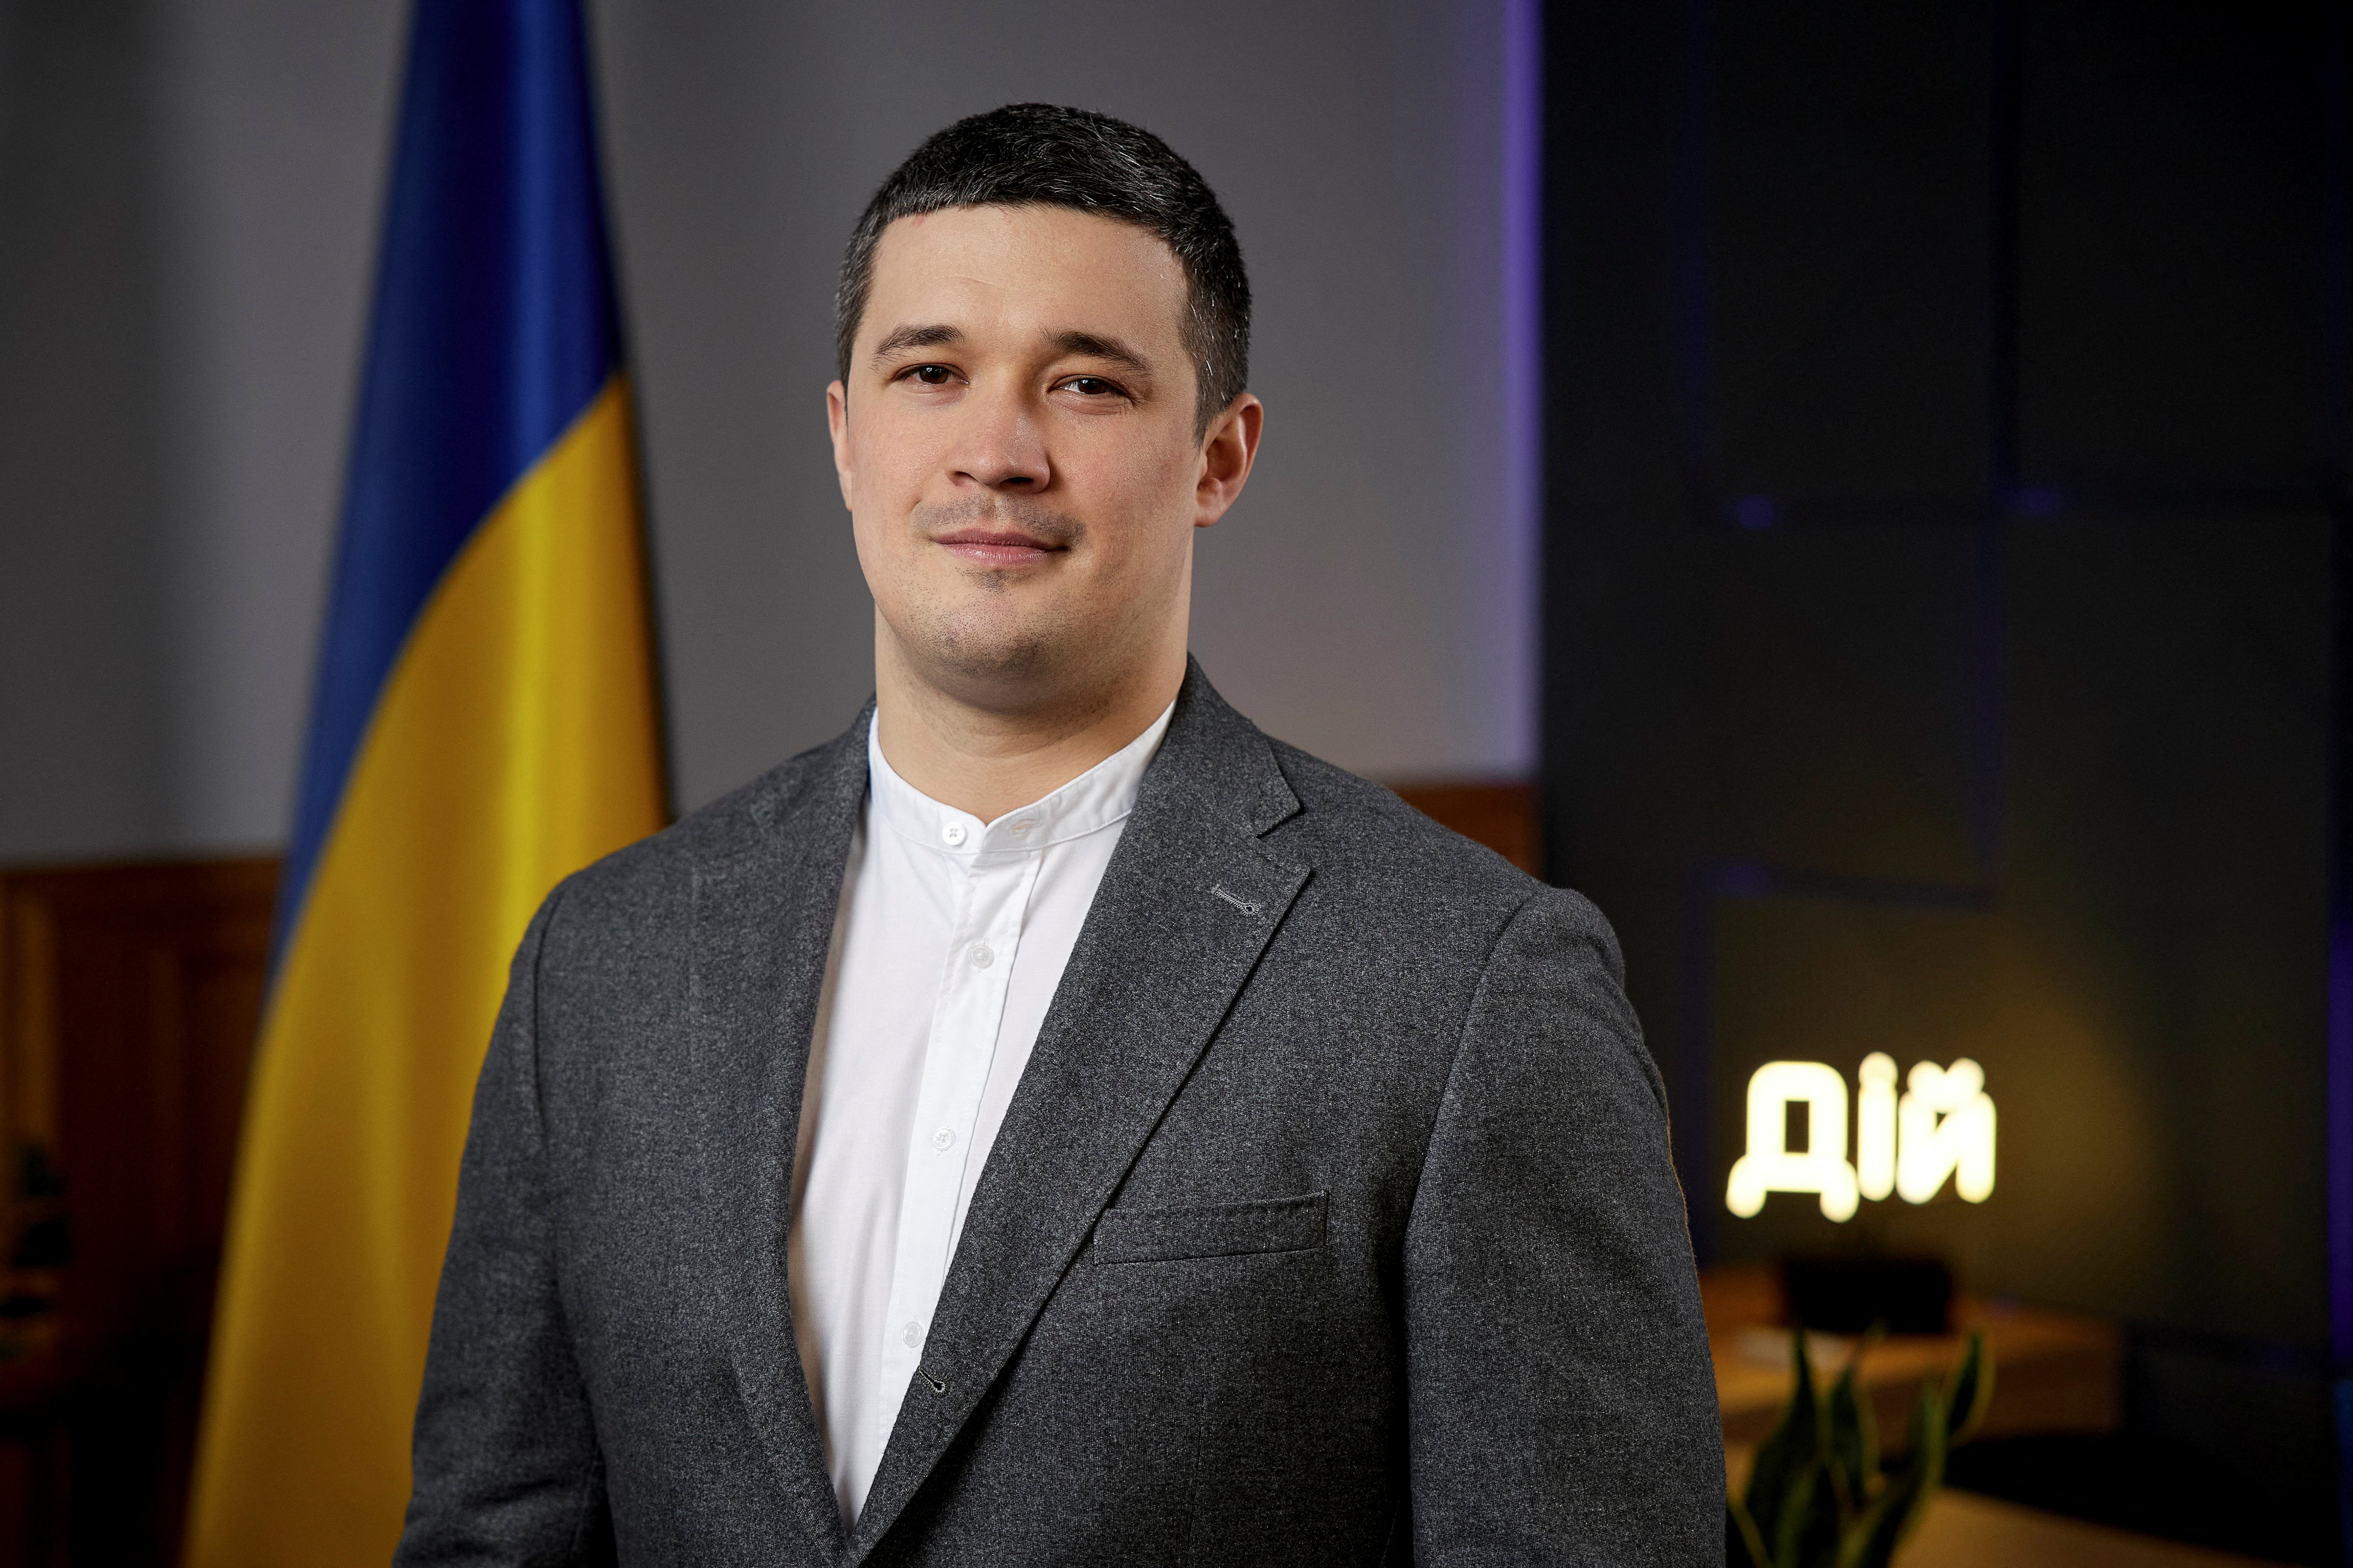 Ukraine’s vice prime minister and minister of digital transformation Mykhailo Fedorov poses for a photograph in Ukraine